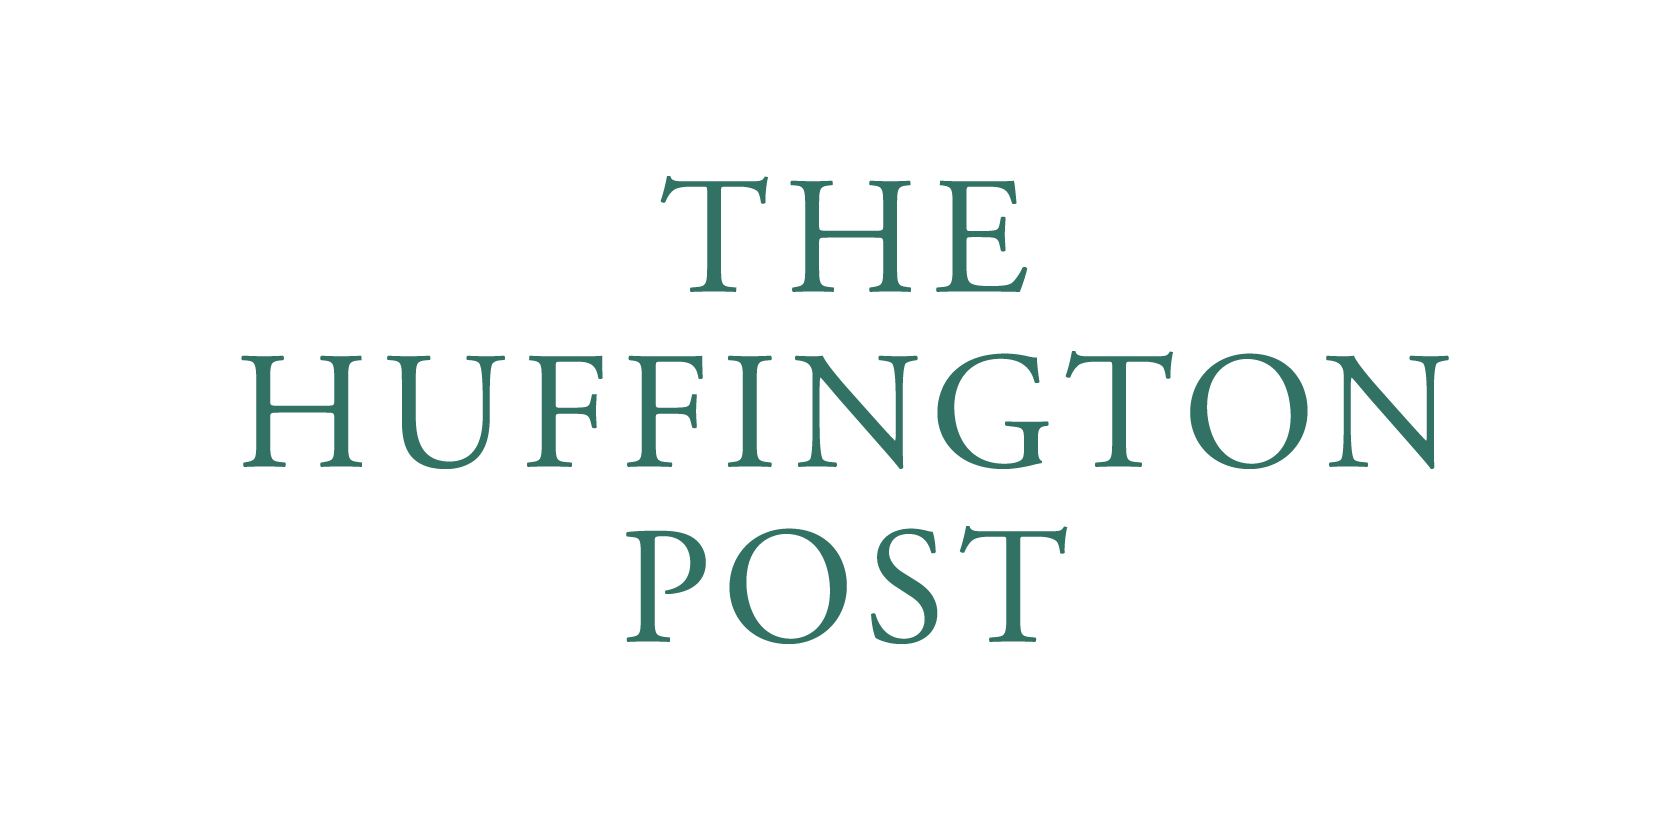 Huffington post impact investing mutual funds faith based investing etf funds